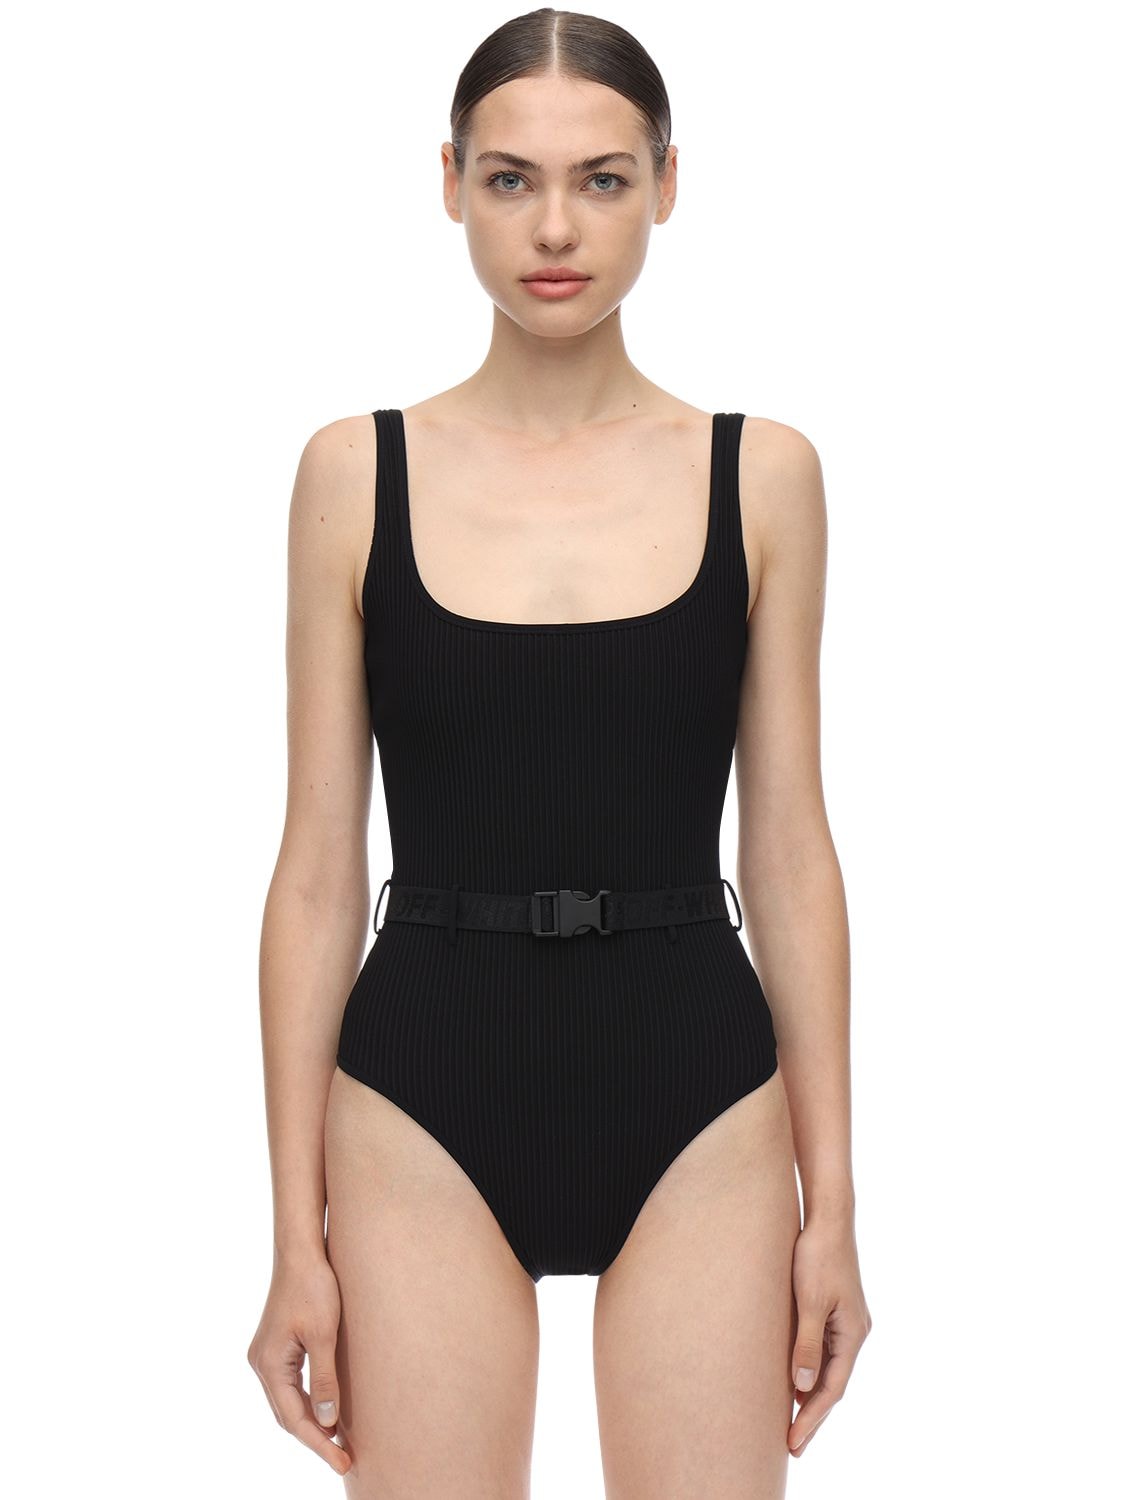 OFF-WHITE BELTED ONE PIECE SWIMSUIT,70I3KW097-MTAWMDA1